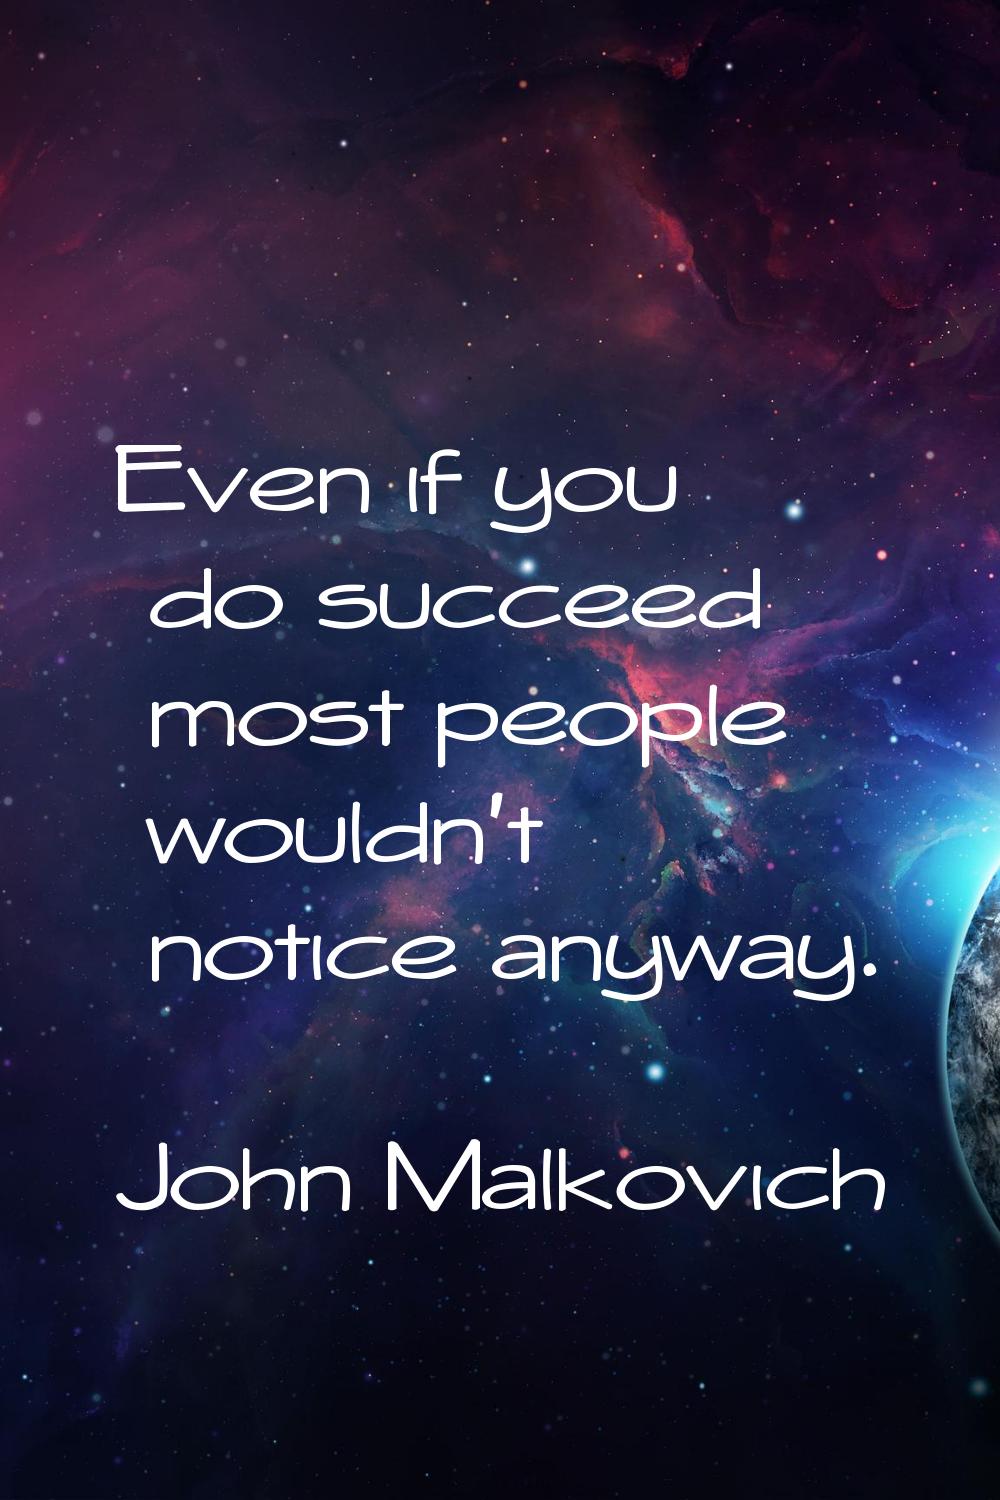 Even if you do succeed most people wouldn't notice anyway.